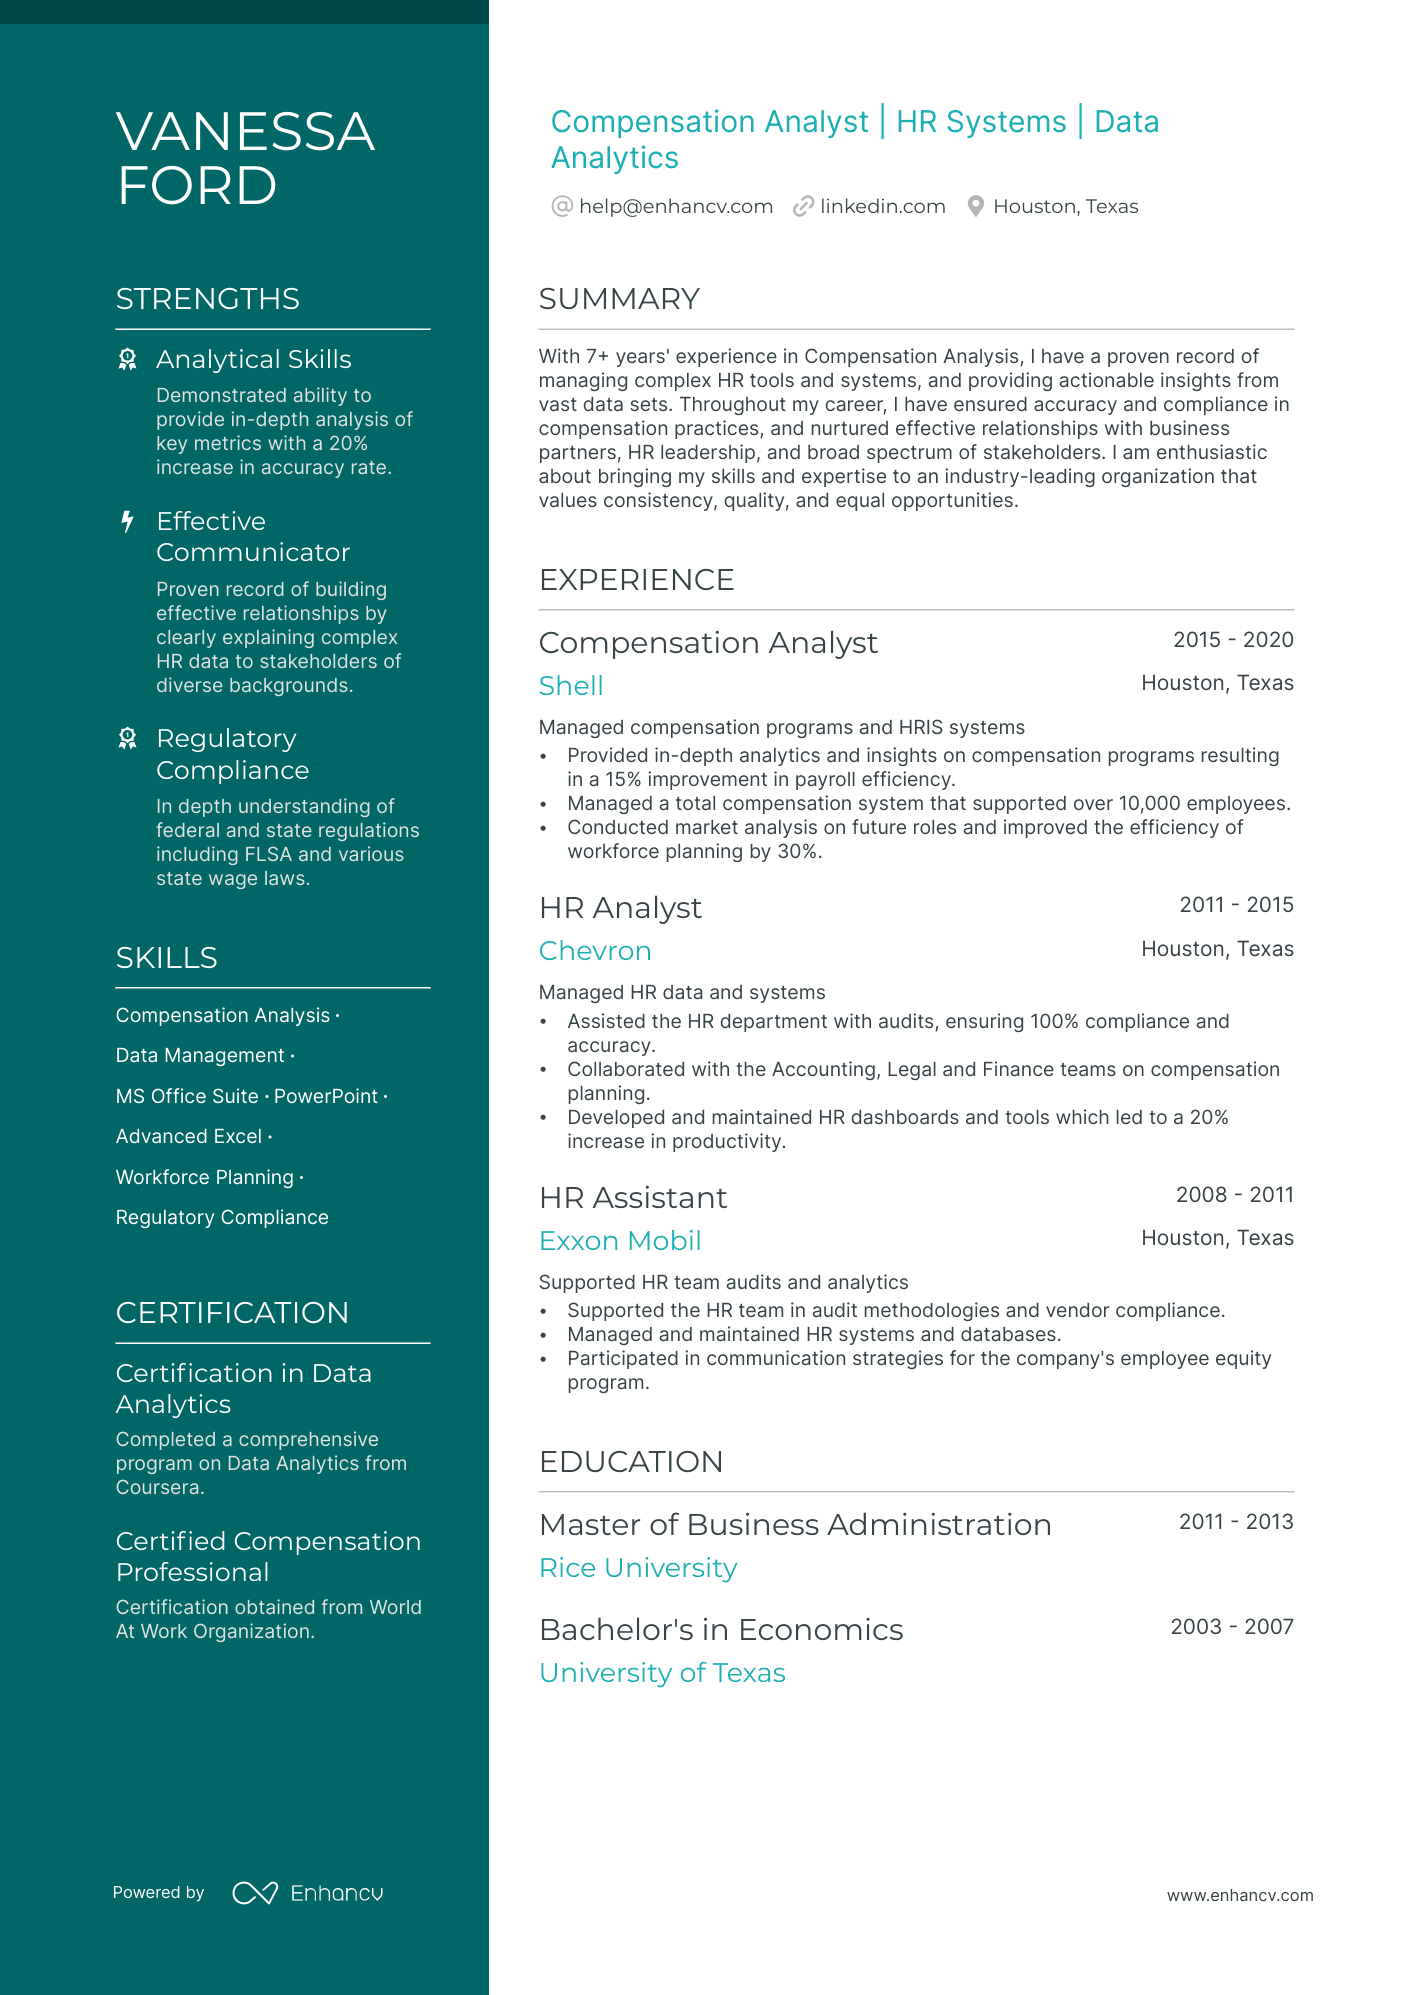 Compensation Analyst resume example